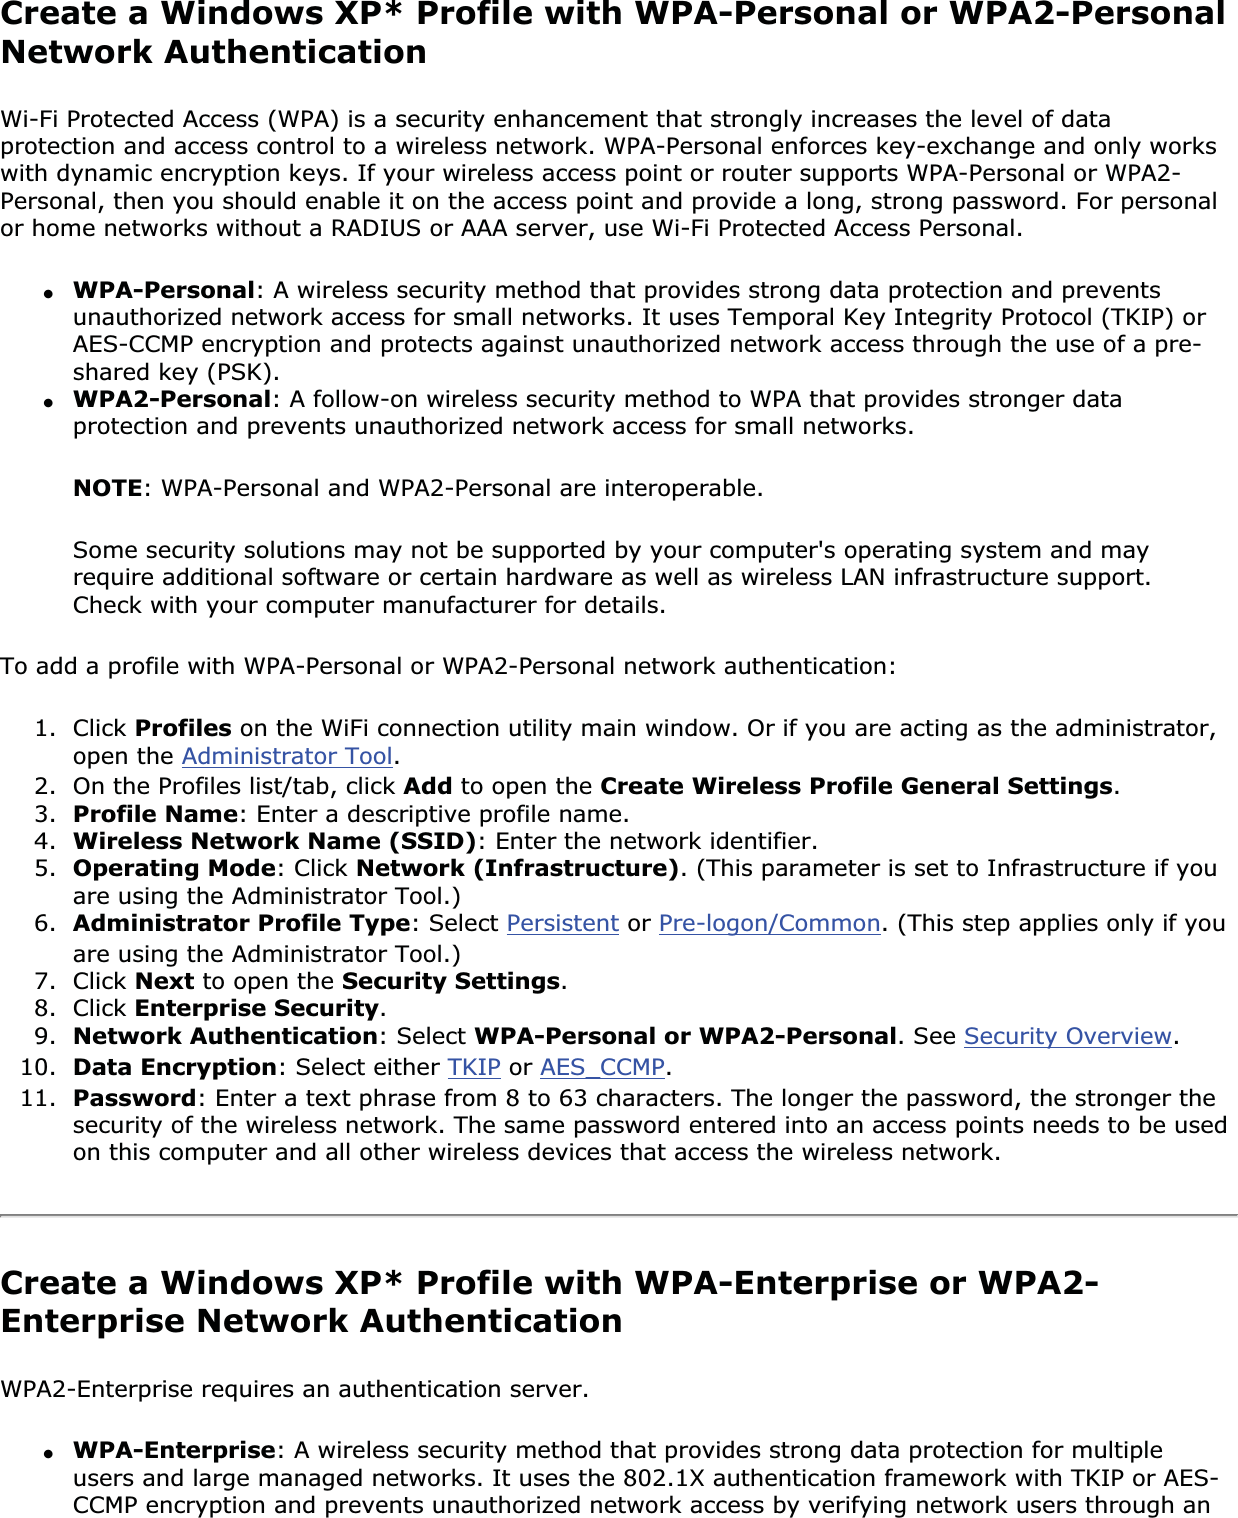 Create a Windows XP* Profile with WPA-Personal or WPA2-Personal Network AuthenticationWi-Fi Protected Access (WPA) is a security enhancement that strongly increases the level of data protection and access control to a wireless network. WPA-Personal enforces key-exchange and only works with dynamic encryption keys. If your wireless access point or router supports WPA-Personal or WPA2-Personal, then you should enable it on the access point and provide a long, strong password. For personal or home networks without a RADIUS or AAA server, use Wi-Fi Protected Access Personal.●WPA-Personal: A wireless security method that provides strong data protection and prevents unauthorized network access for small networks. It uses Temporal Key Integrity Protocol (TKIP) or AES-CCMP encryption and protects against unauthorized network access through the use of a pre-shared key (PSK).●WPA2-Personal: A follow-on wireless security method to WPA that provides stronger data protection and prevents unauthorized network access for small networks. NOTE: WPA-Personal and WPA2-Personal are interoperable.Some security solutions may not be supported by your computer&apos;s operating system and may require additional software or certain hardware as well as wireless LAN infrastructure support. Check with your computer manufacturer for details.To add a profile with WPA-Personal or WPA2-Personal network authentication: 1. Click Profiles on the WiFi connection utility main window. Or if you are acting as the administrator, open the Administrator Tool.2. On the Profiles list/tab, click Add to open the Create Wireless Profile General Settings.3. Profile Name: Enter a descriptive profile name.4. Wireless Network Name (SSID): Enter the network identifier.5. Operating Mode: Click Network (Infrastructure). (This parameter is set to Infrastructure if you are using the Administrator Tool.)6. Administrator Profile Type: Select Persistent or Pre-logon/Common. (This step applies only if you are using the Administrator Tool.)7. Click Next to open the Security Settings.8. Click Enterprise Security.9. Network Authentication: Select WPA-Personal or WPA2-Personal. See Security Overview.10. Data Encryption: Select either TKIP or AES_CCMP.11. Password: Enter a text phrase from 8 to 63 characters. The longer the password, the stronger the security of the wireless network. The same password entered into an access points needs to be used on this computer and all other wireless devices that access the wireless network.Create a Windows XP* Profile with WPA-Enterprise or WPA2-Enterprise Network Authentication WPA2-Enterprise requires an authentication server.●WPA-Enterprise: A wireless security method that provides strong data protection for multiple users and large managed networks. It uses the 802.1X authentication framework with TKIP or AES-CCMP encryption and prevents unauthorized network access by verifying network users through an 